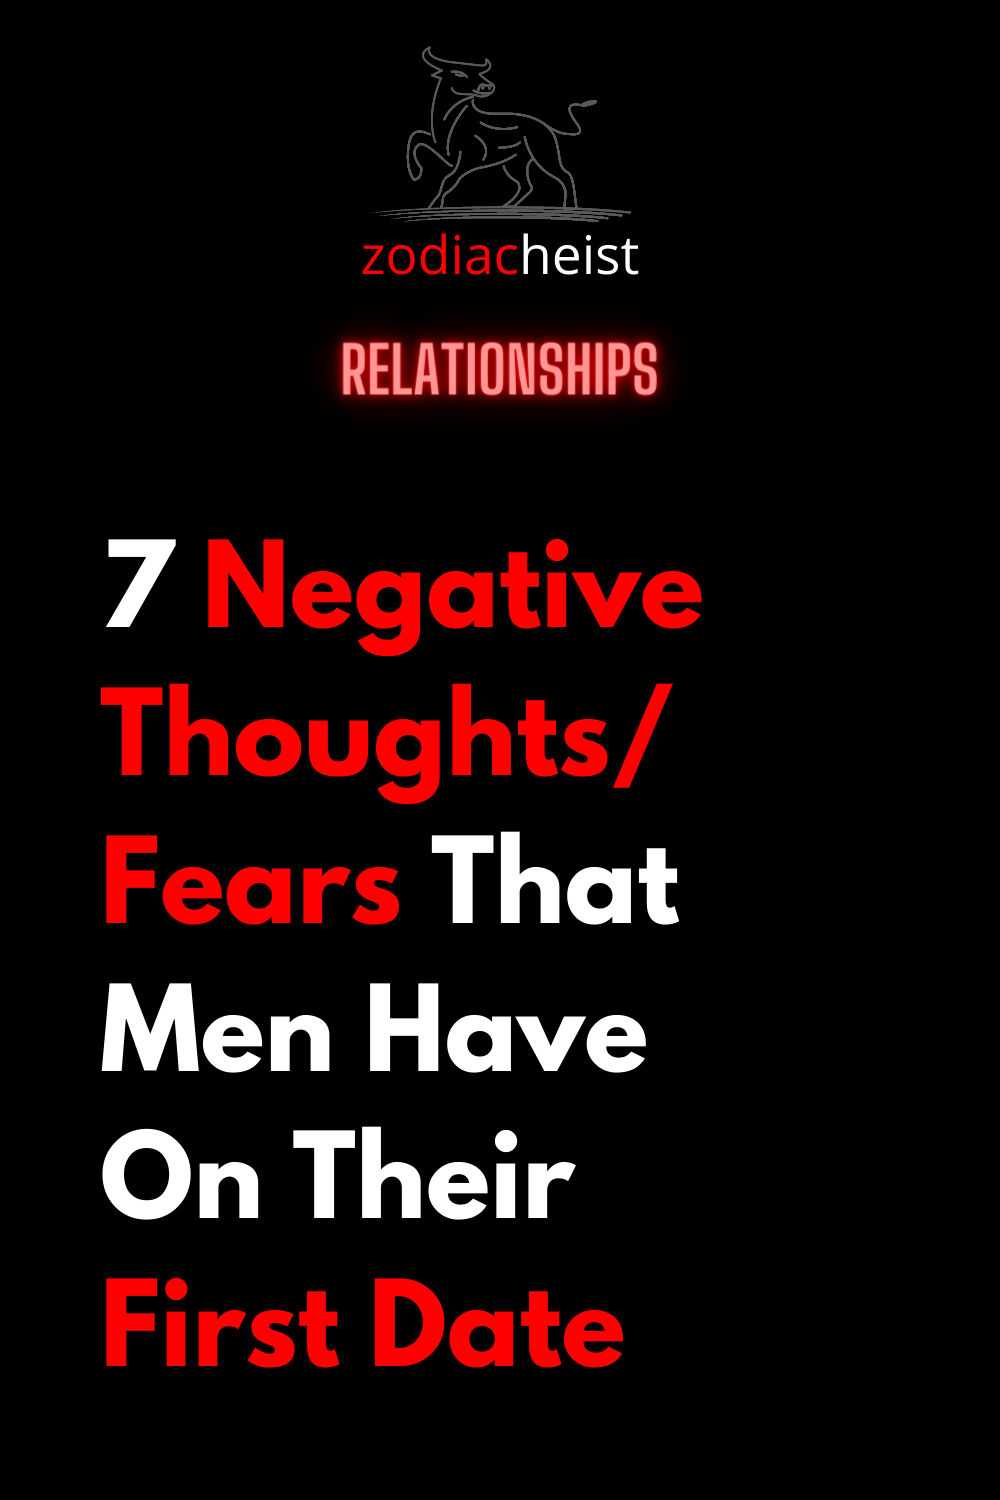 7 Negative Thoughts/Fears That Men Have On Their First Date